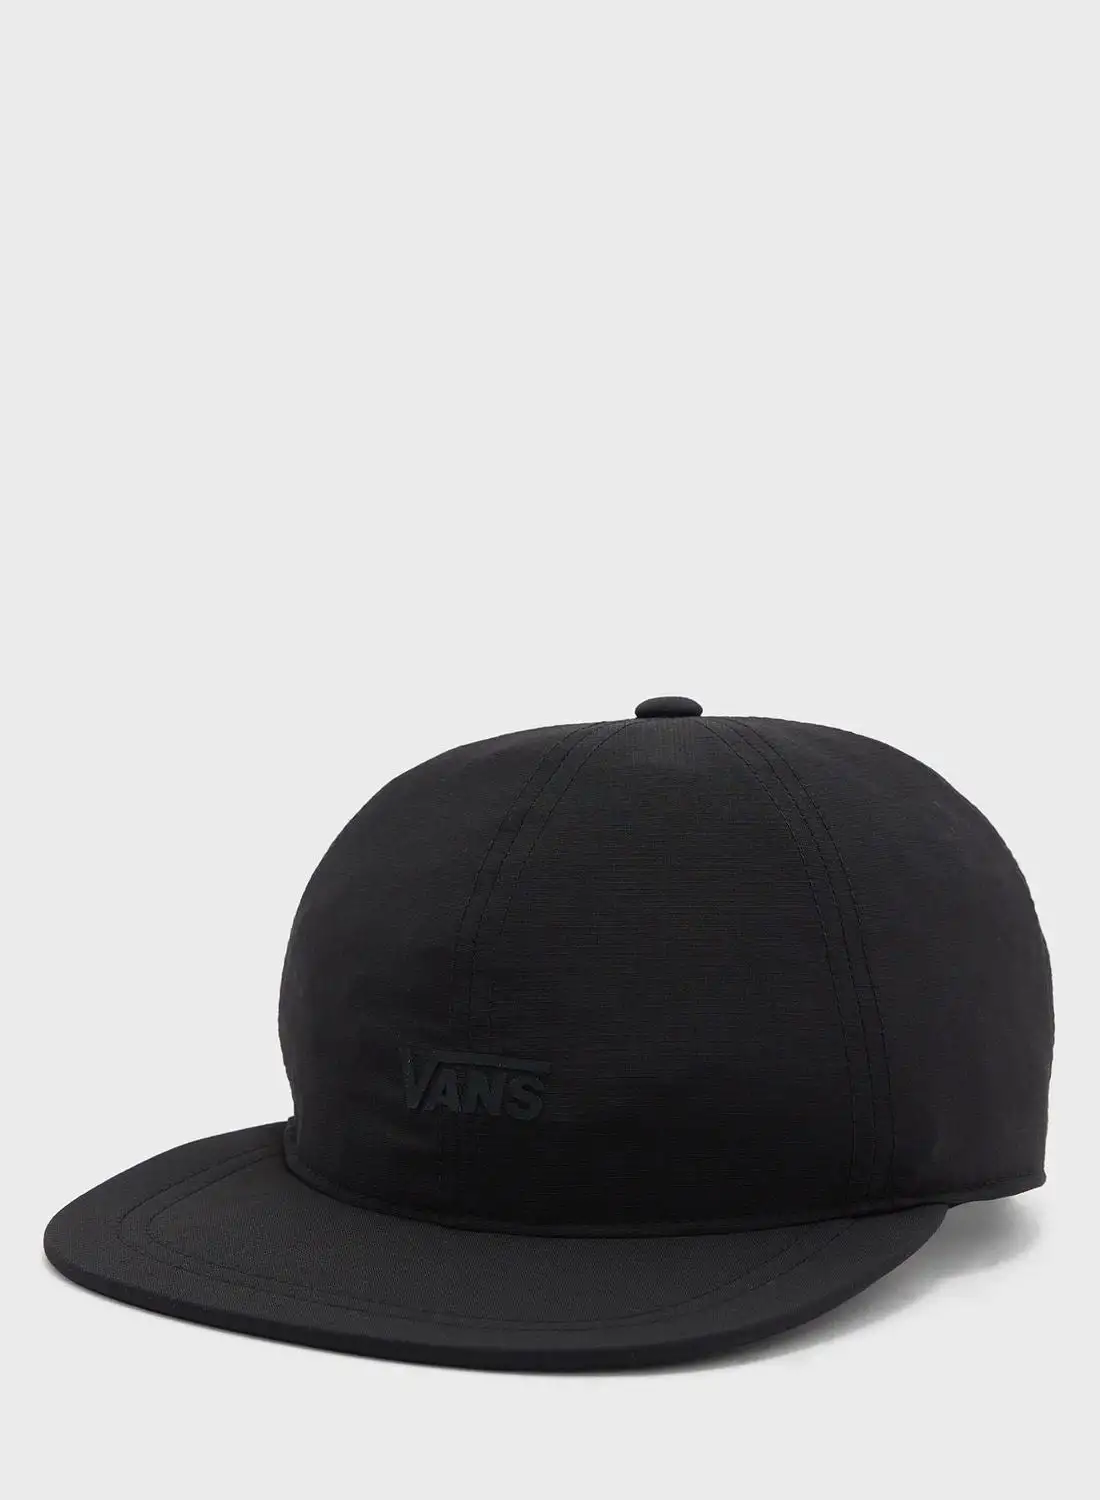 VANS My Pace Curved Cap